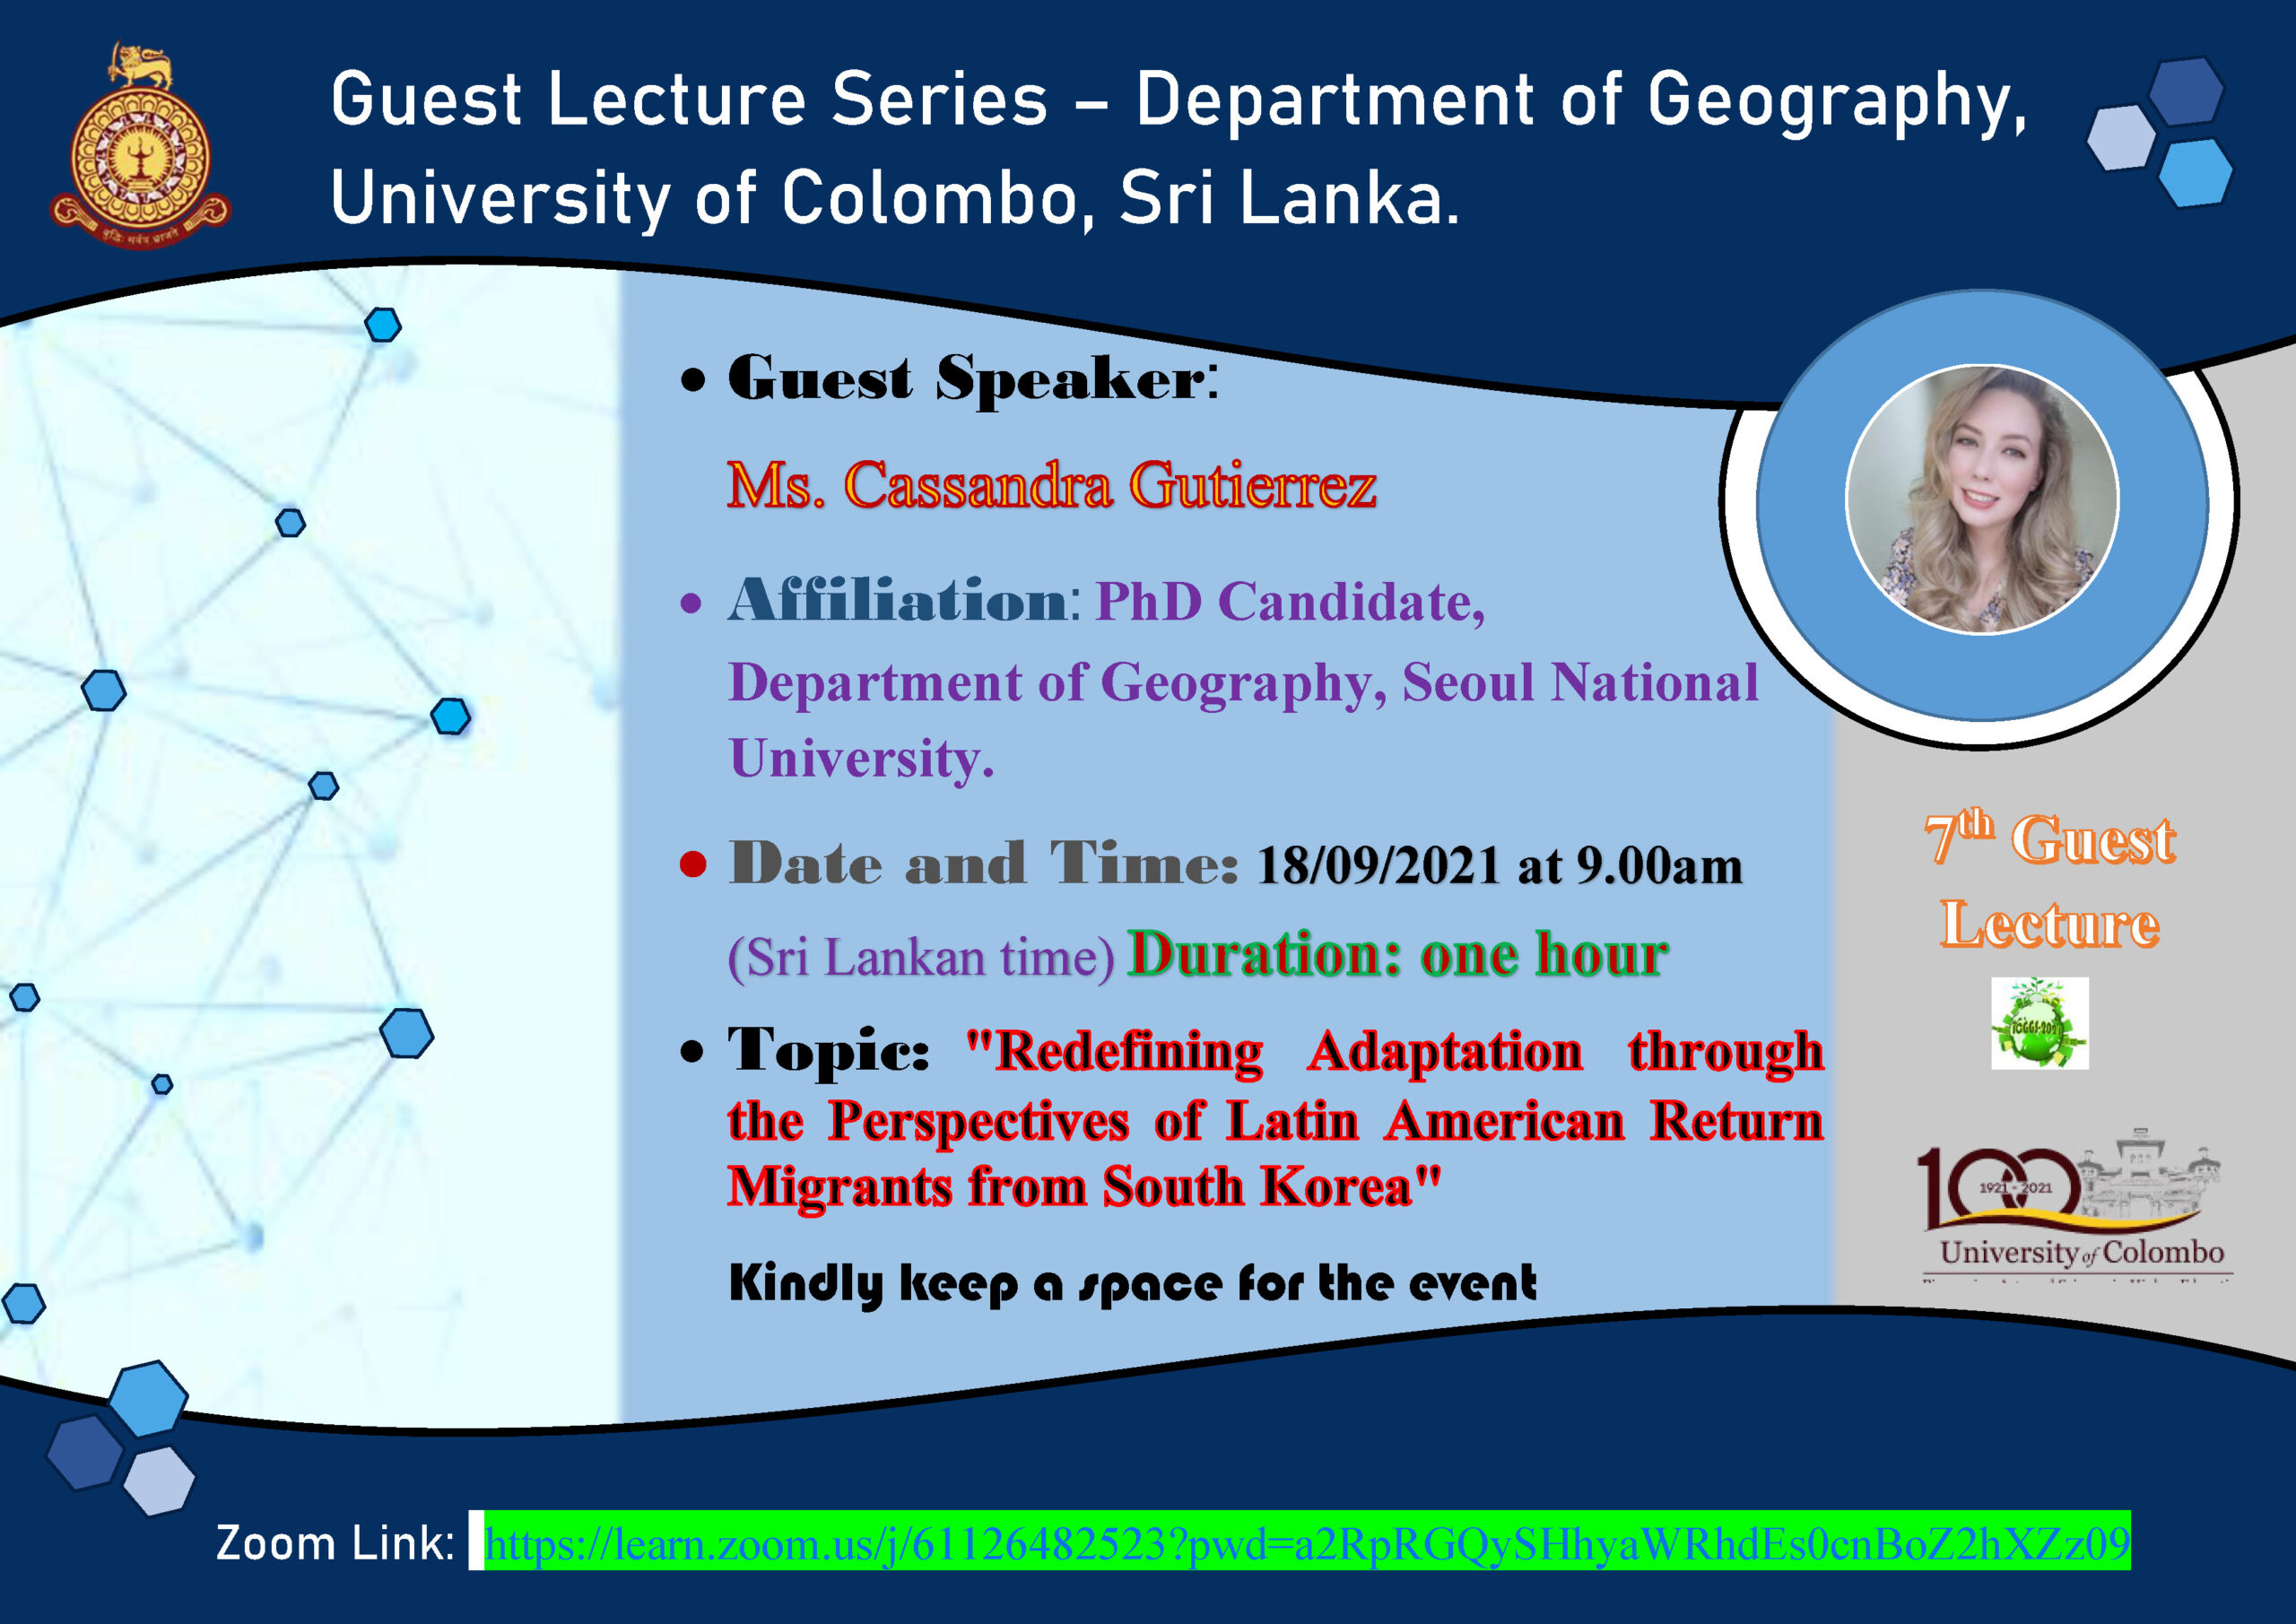 Guest Lecture on “Redefining Adaptation through the Perspectives of Latin American Return Migrants from South Korea”-18th Sept.